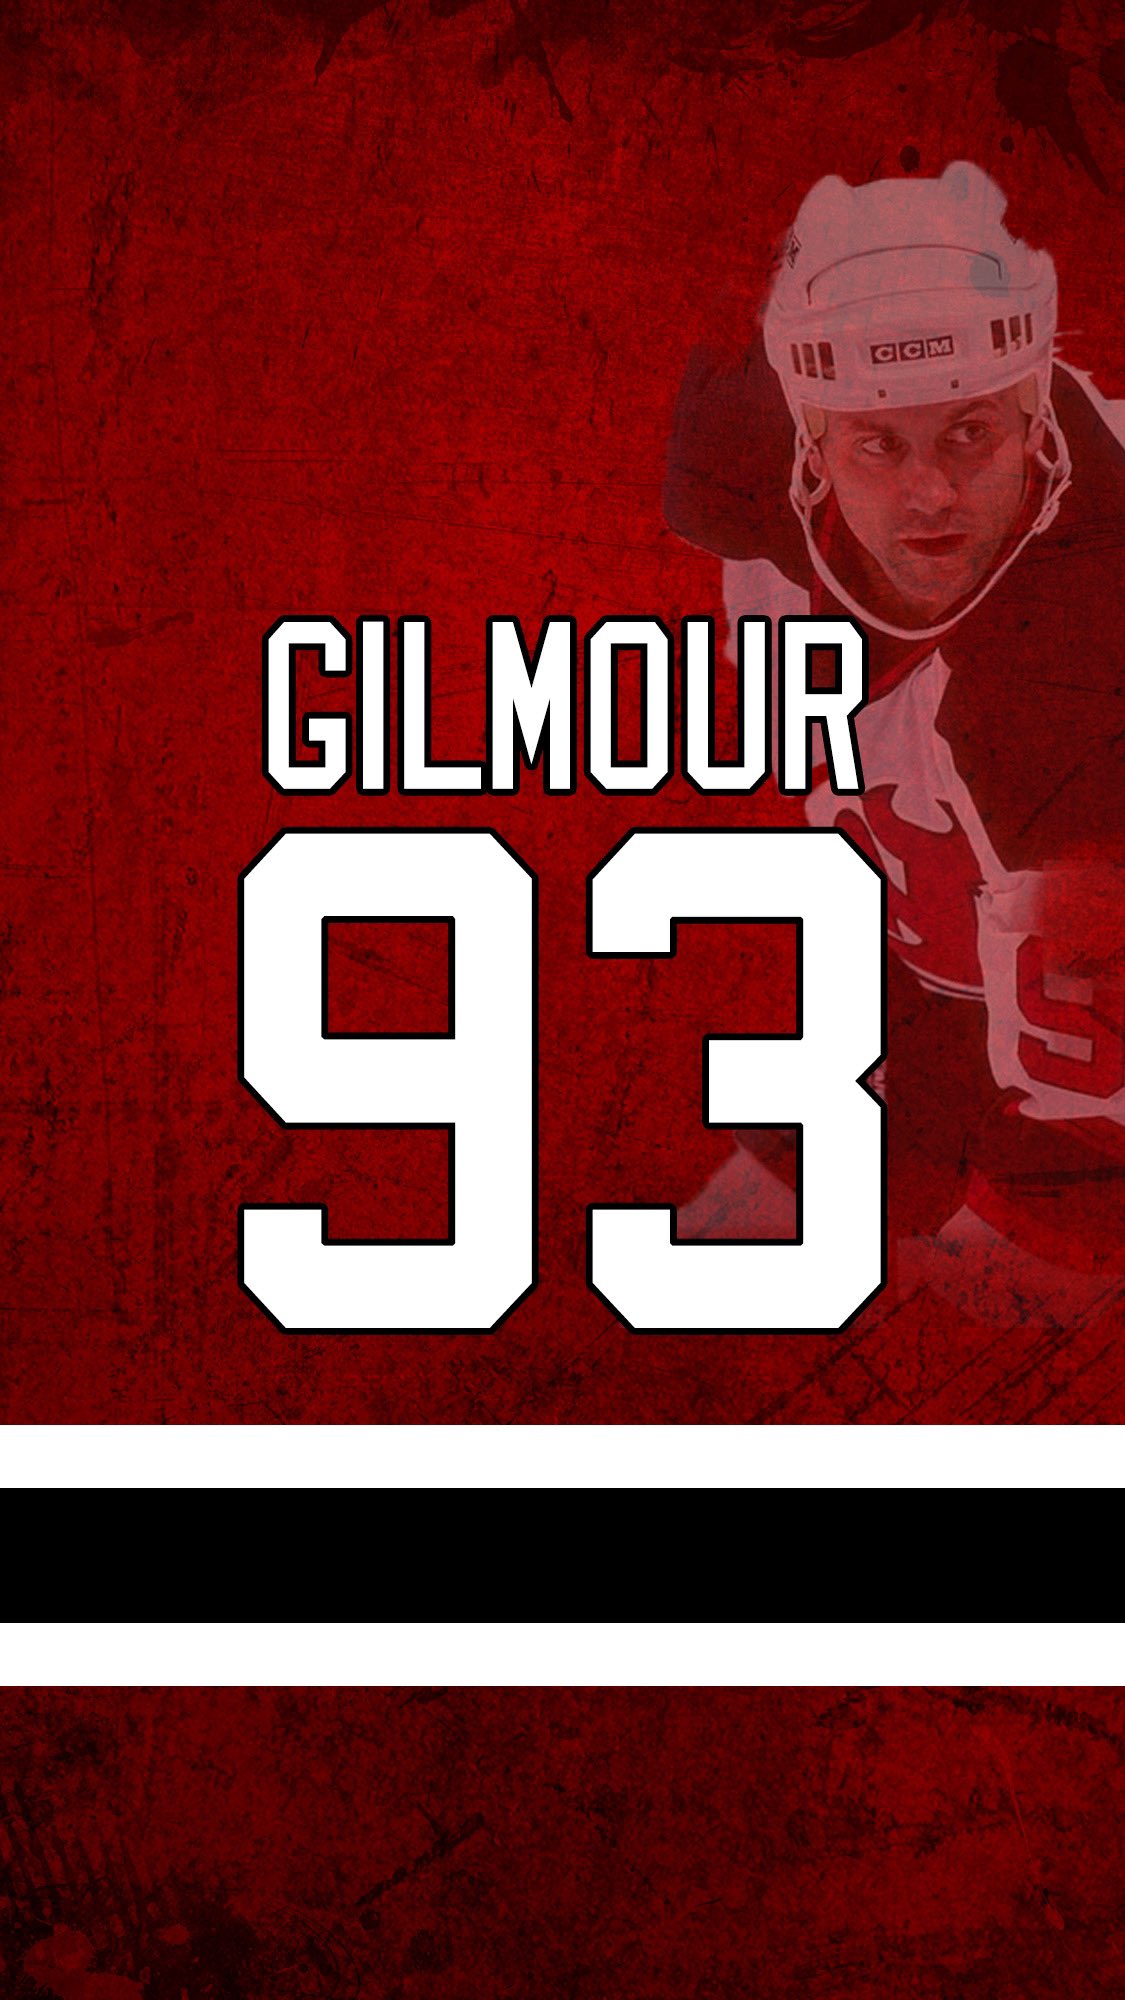 Doug Gilmour on X: #WallpaperWednesday time to refresh that home